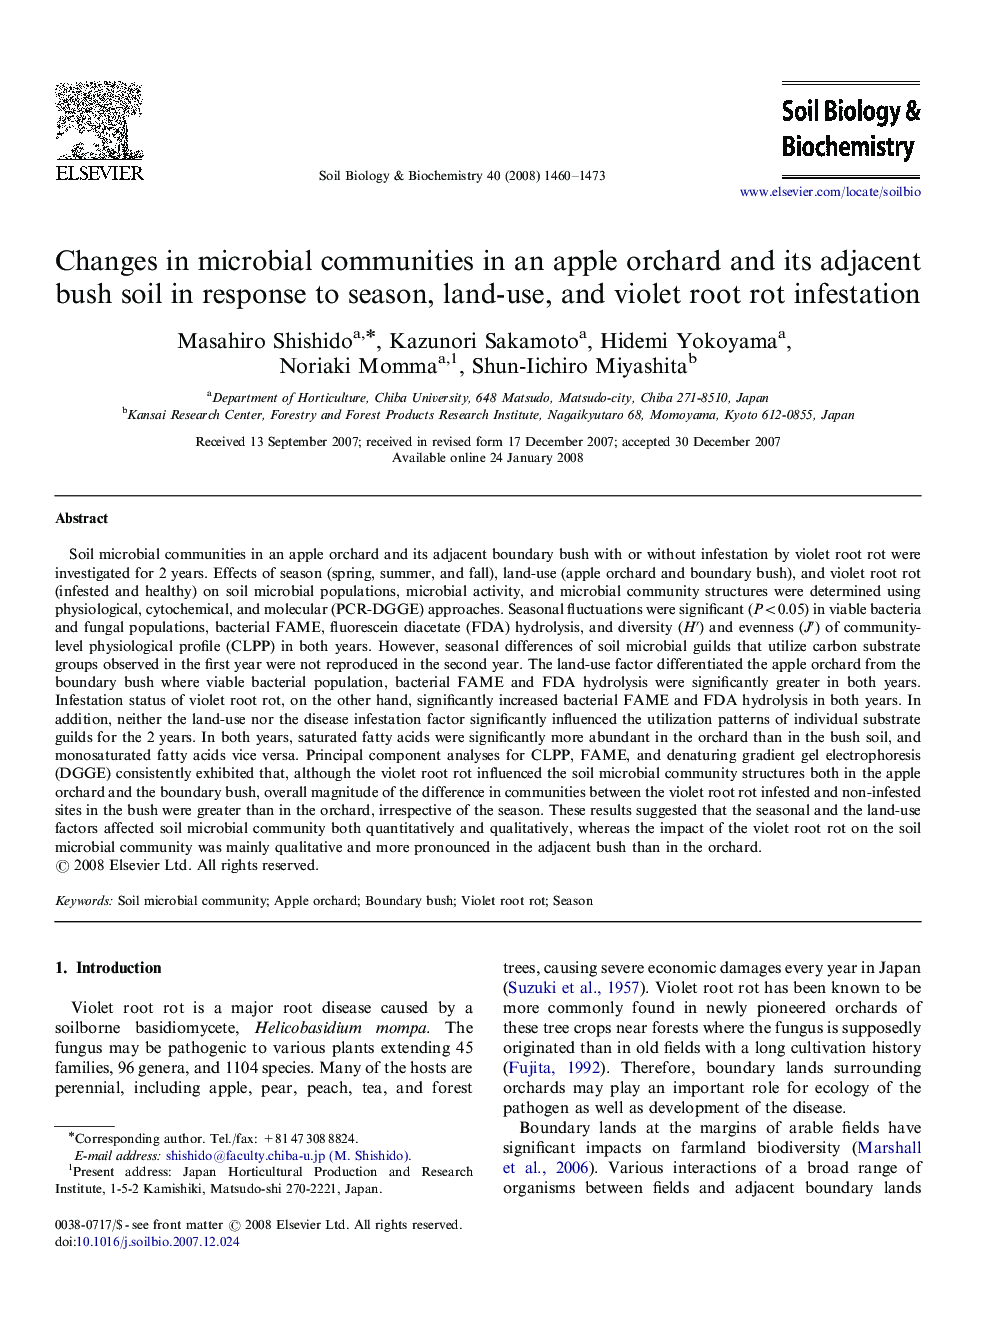 Changes in microbial communities in an apple orchard and its adjacent bush soil in response to season, land-use, and violet root rot infestation